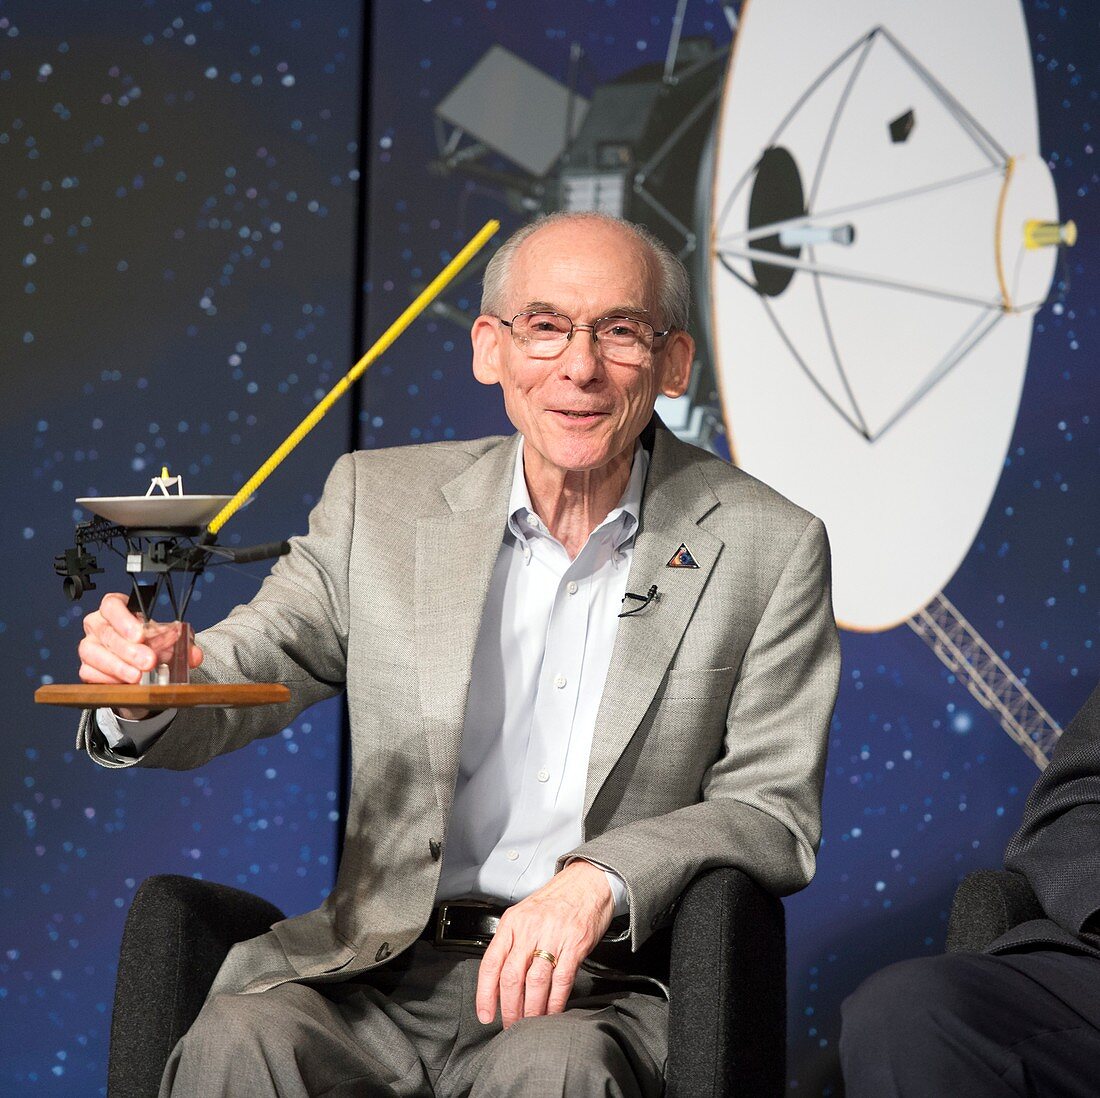 Edward Stone, Voyager project scientist